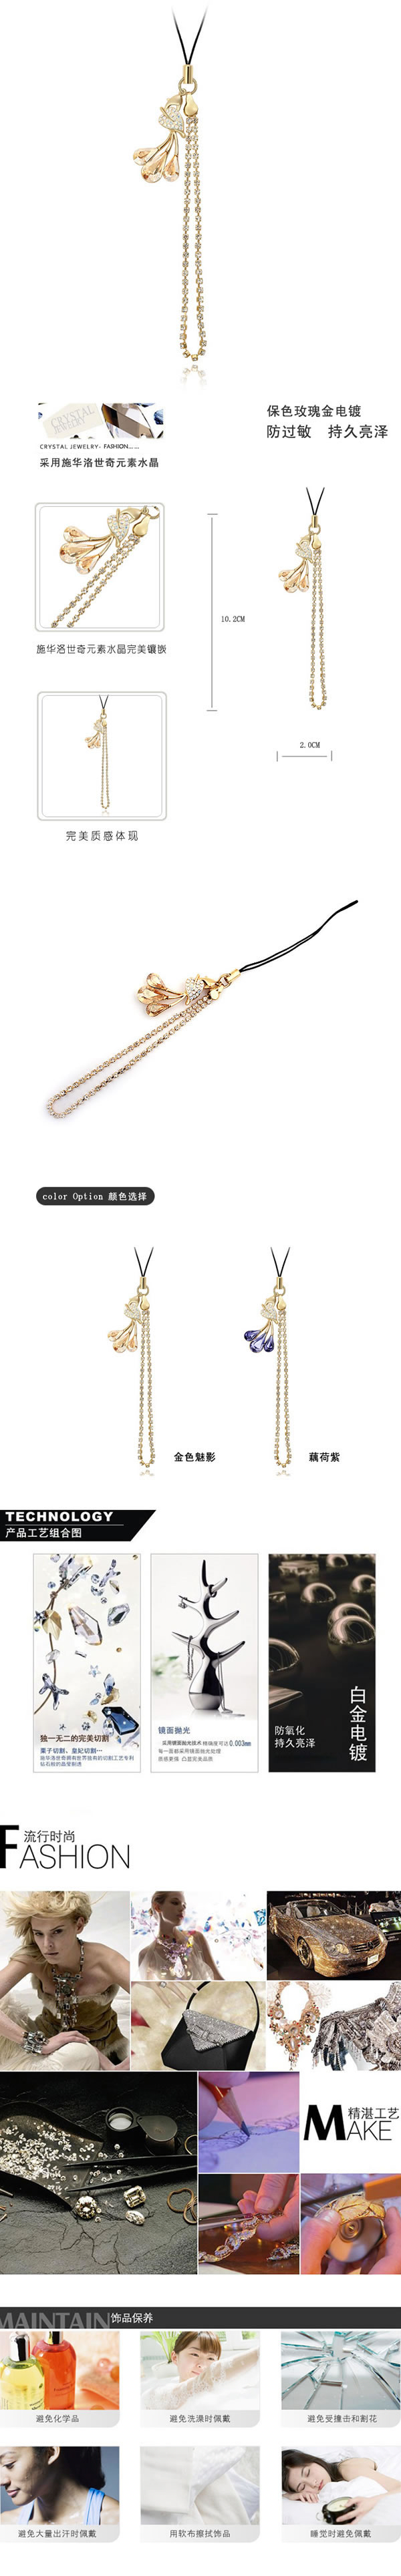 Automatic Champagne
Champagne Bag Chain-Leaves Design Alloy Mobile phone products,Anti-Dust Plug